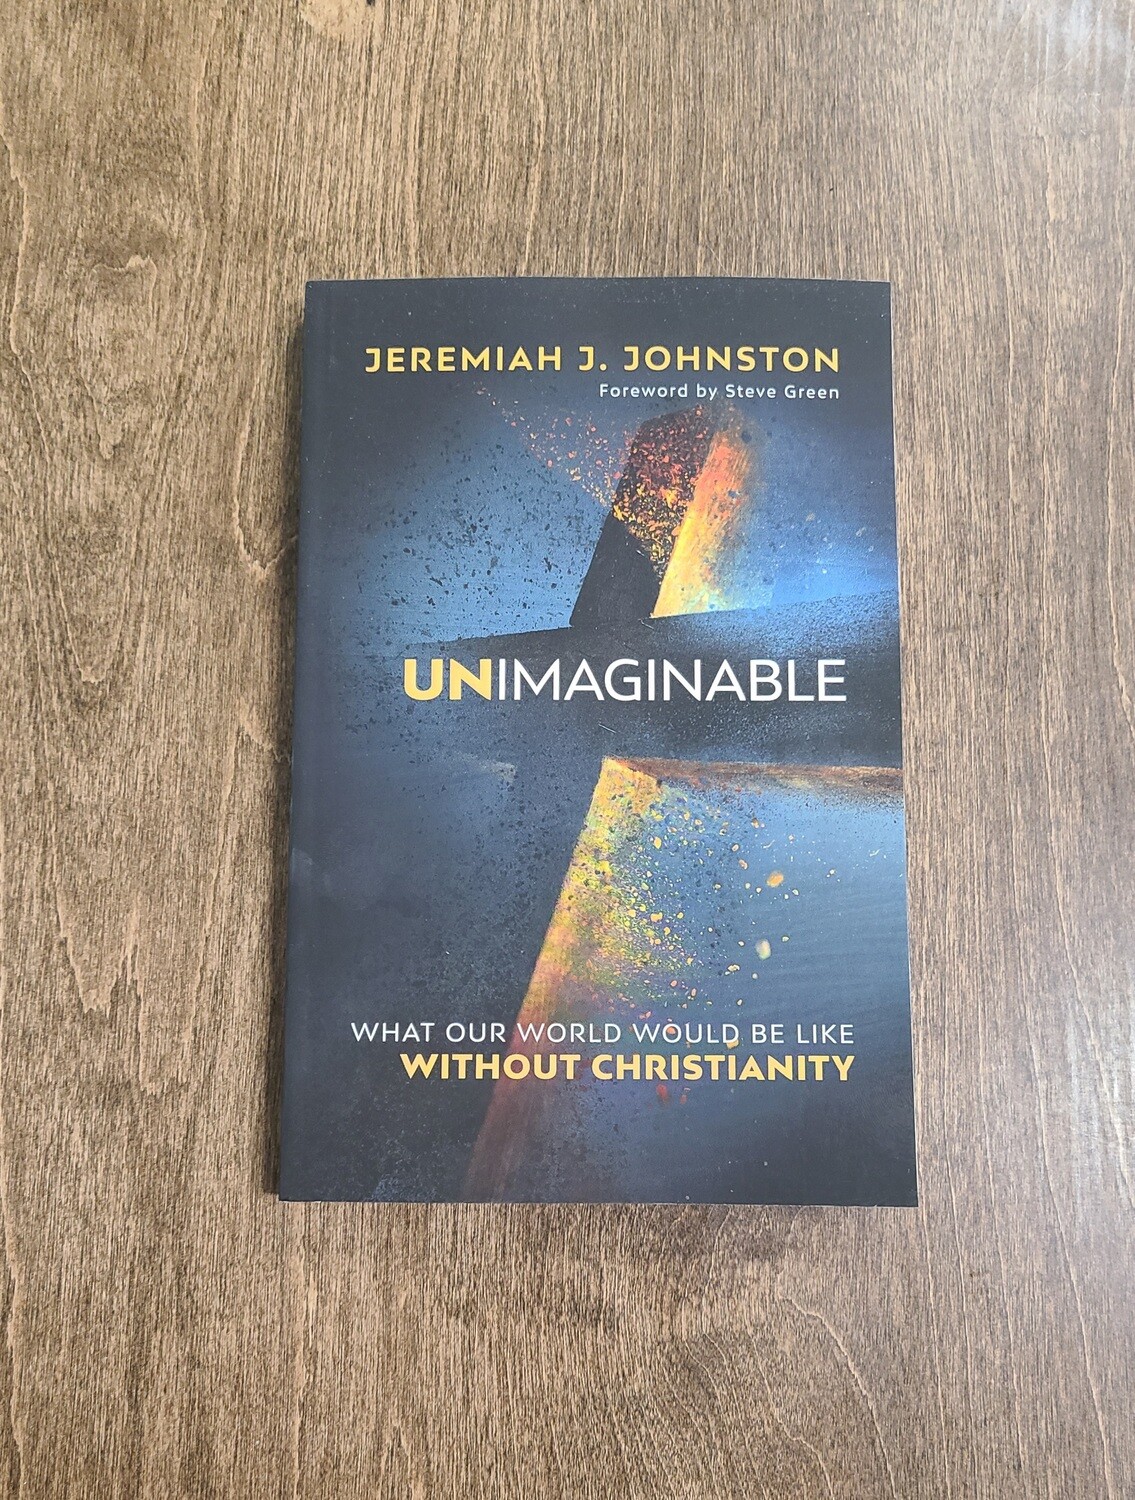 Unimaginable: What our World would be like without Christianity by Jeremiah J. Johnston